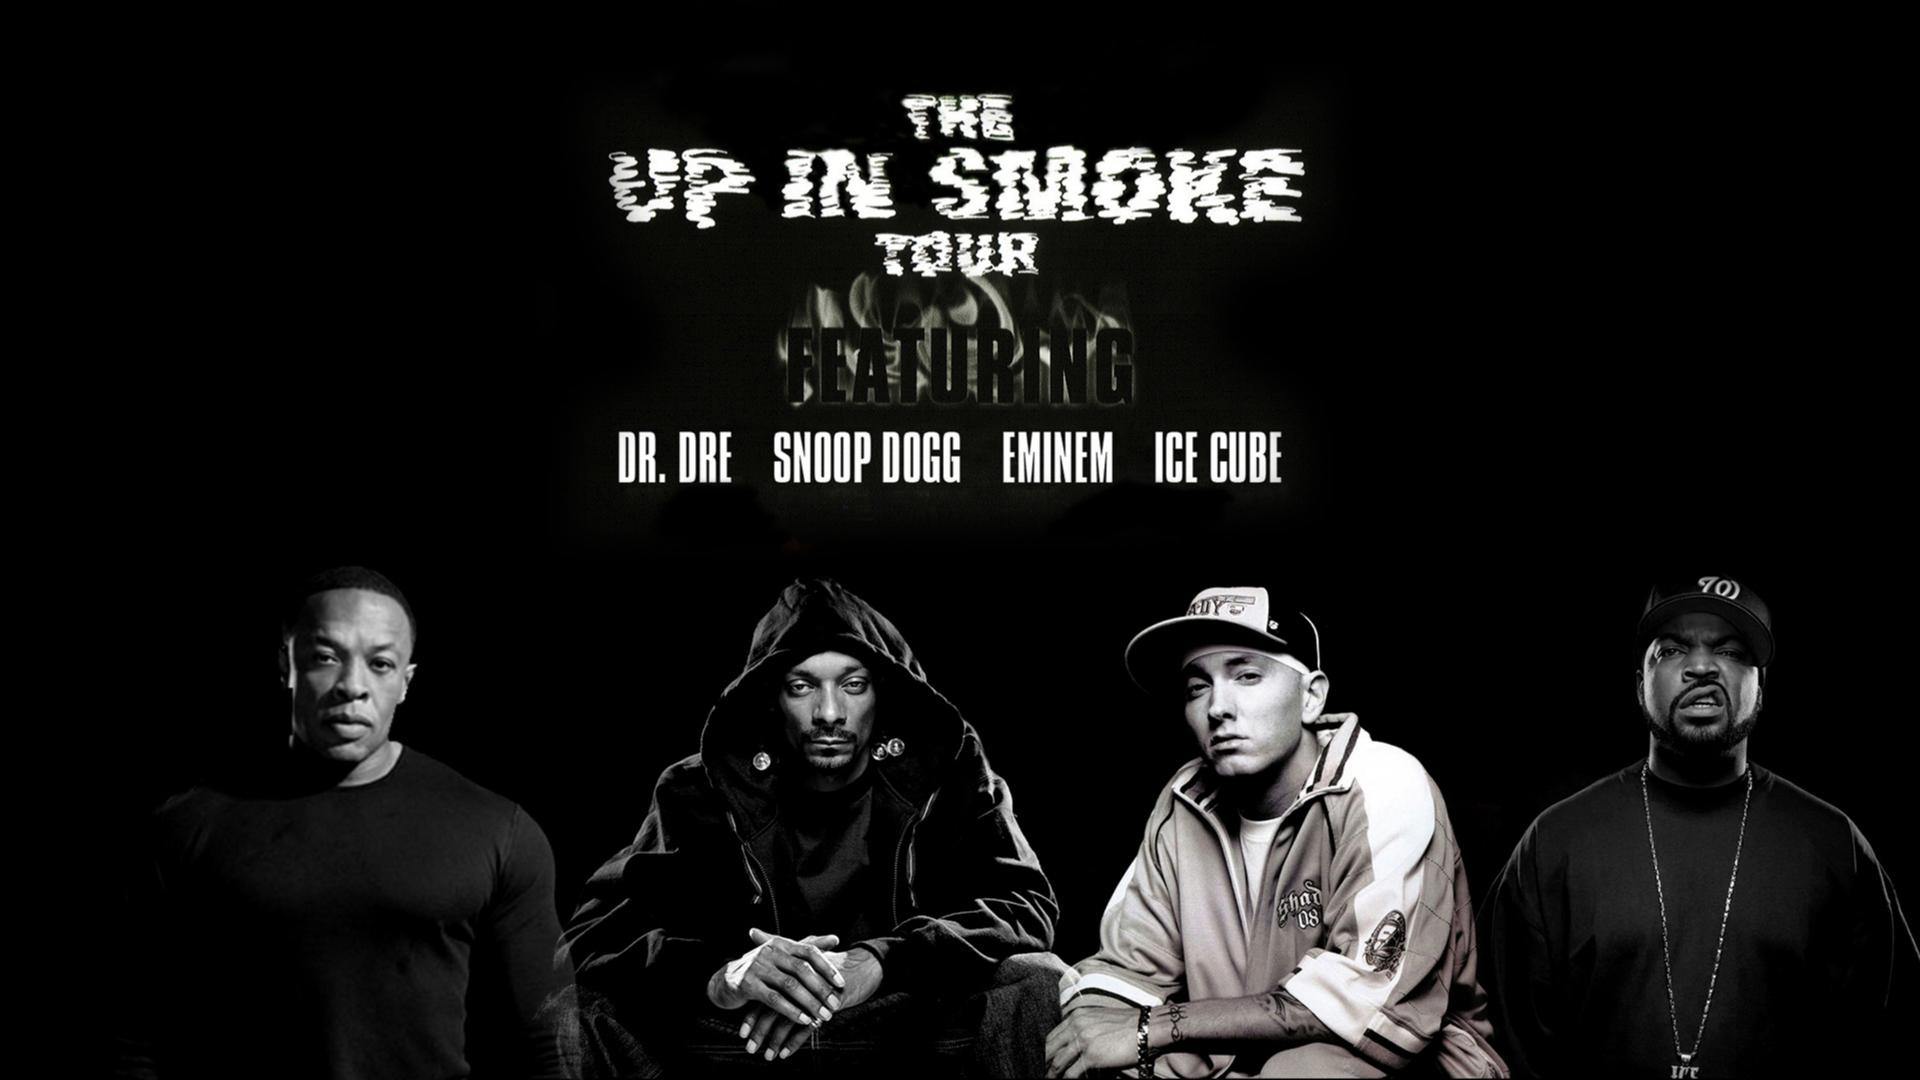 up in smoke tour revenue